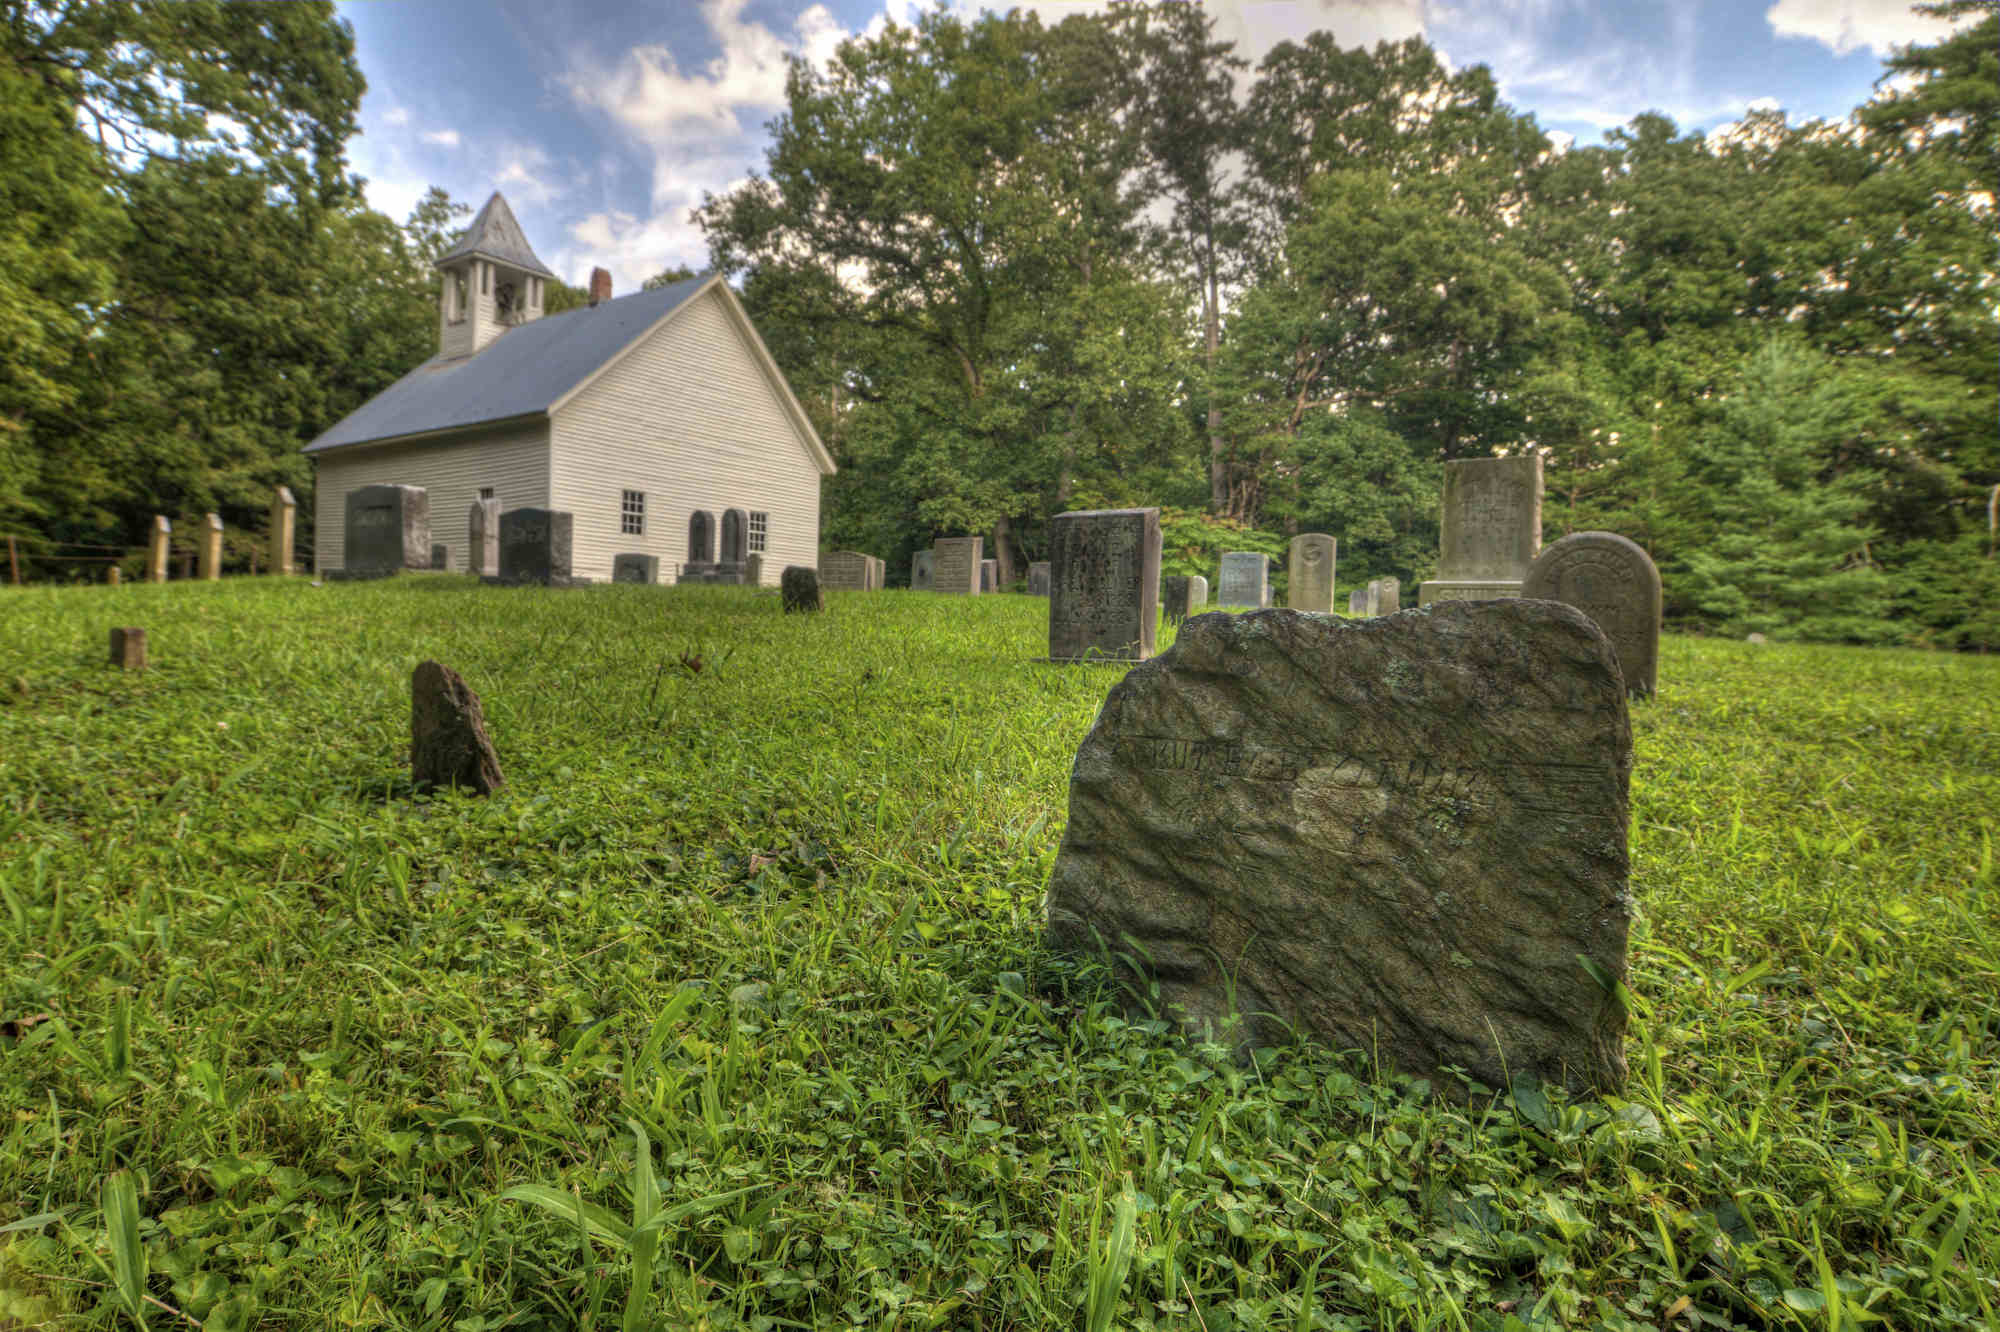 Worn tombstones mark gravesites behind the all-white Cades Cove Primitive Baptist Church in Cades Cove in Great Smoky Mountains National Park.